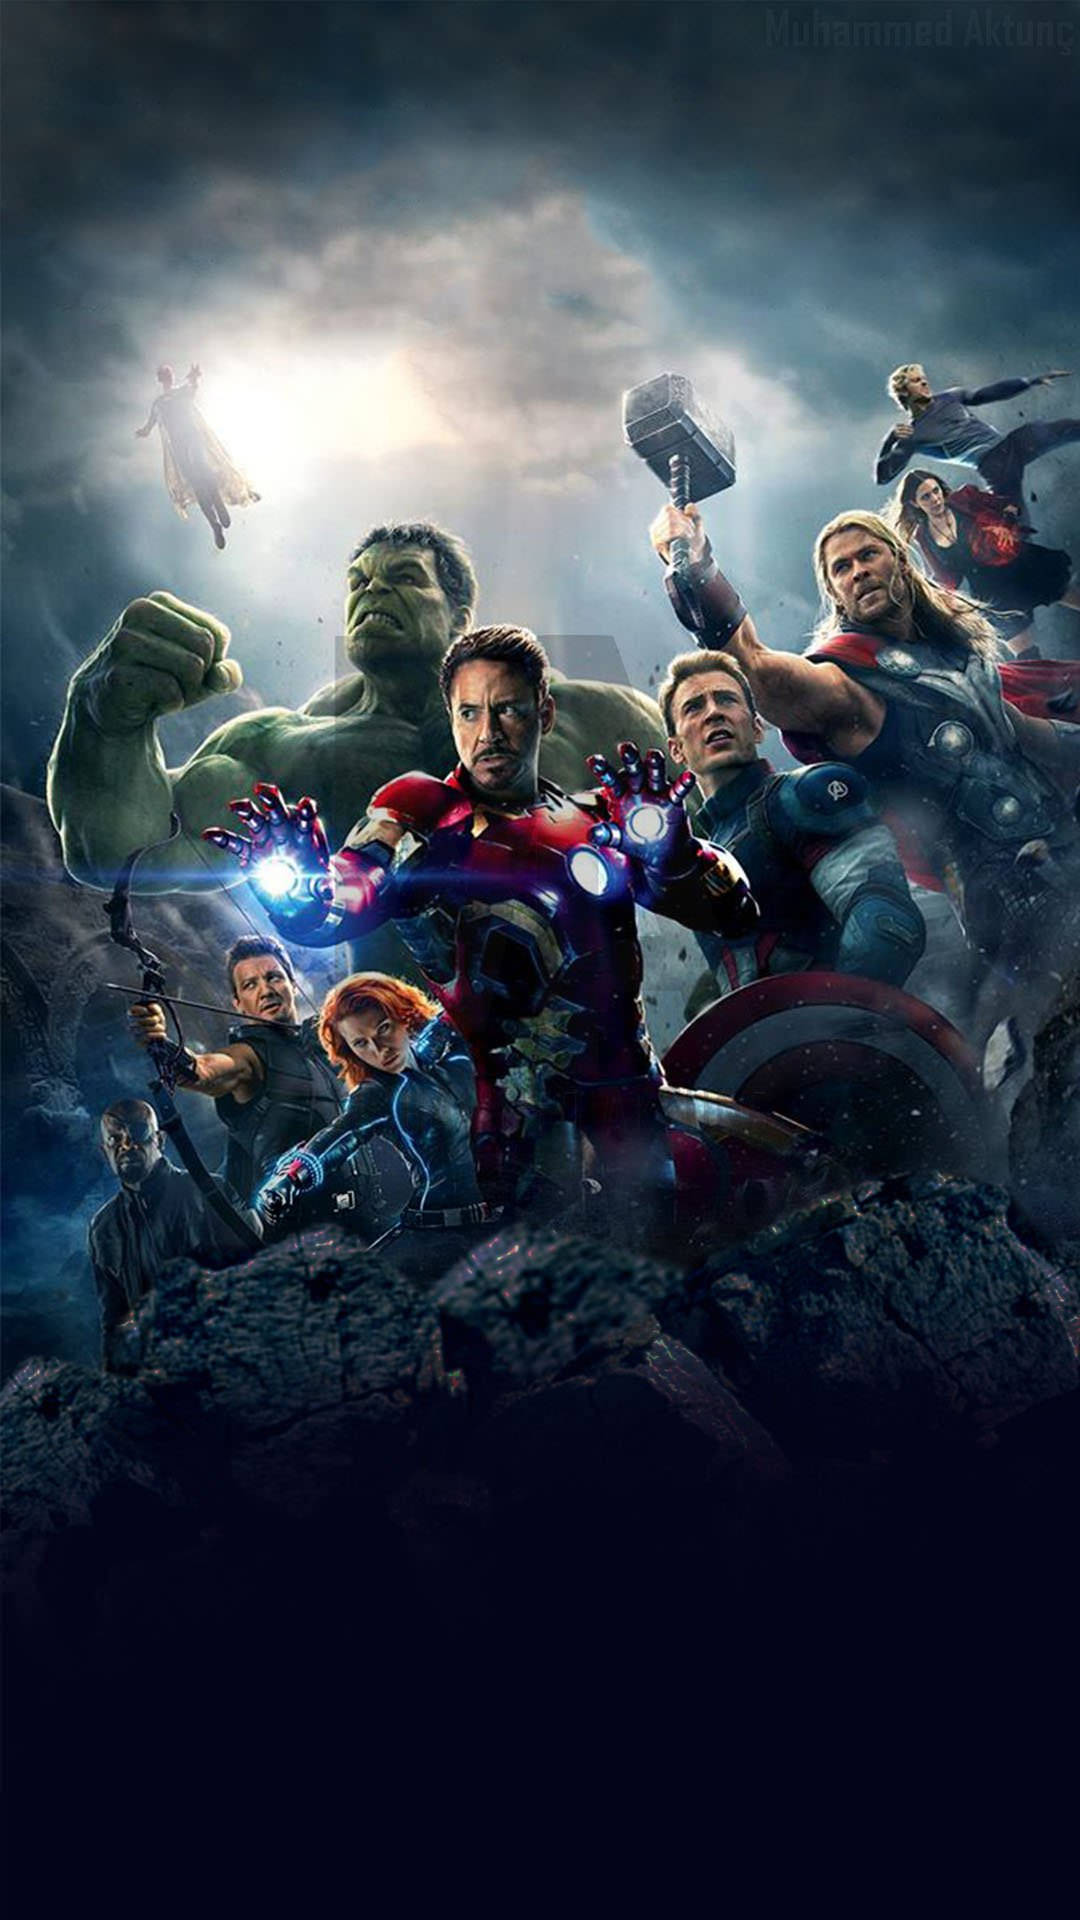 Worms Eye View Avengers Iphone Wallpaper